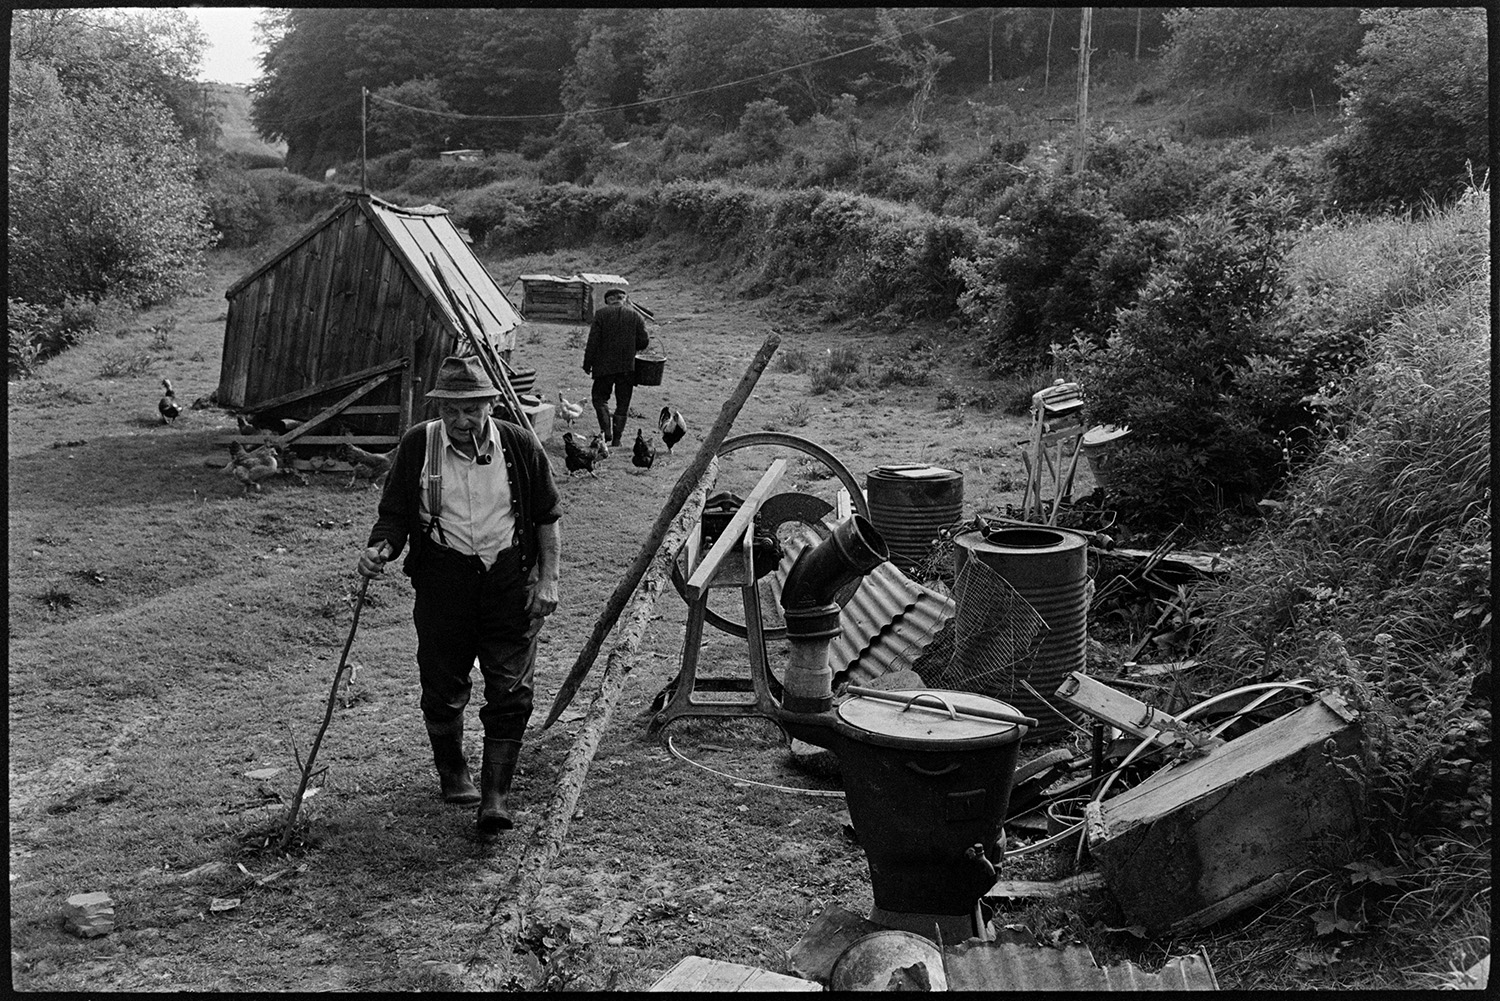 Two farmers sitting in field chatting, chickens and poultry house. Straw cutter. 
[Archie Parkhouse walking past an assortment of items, including barrels, a straw cutter and piping, in a field at Millhams, Dolton. He is smoking a pipe. In the background Ivor Brock is carrying a bucket past a poultry house and chickens, possibly feeding them.]